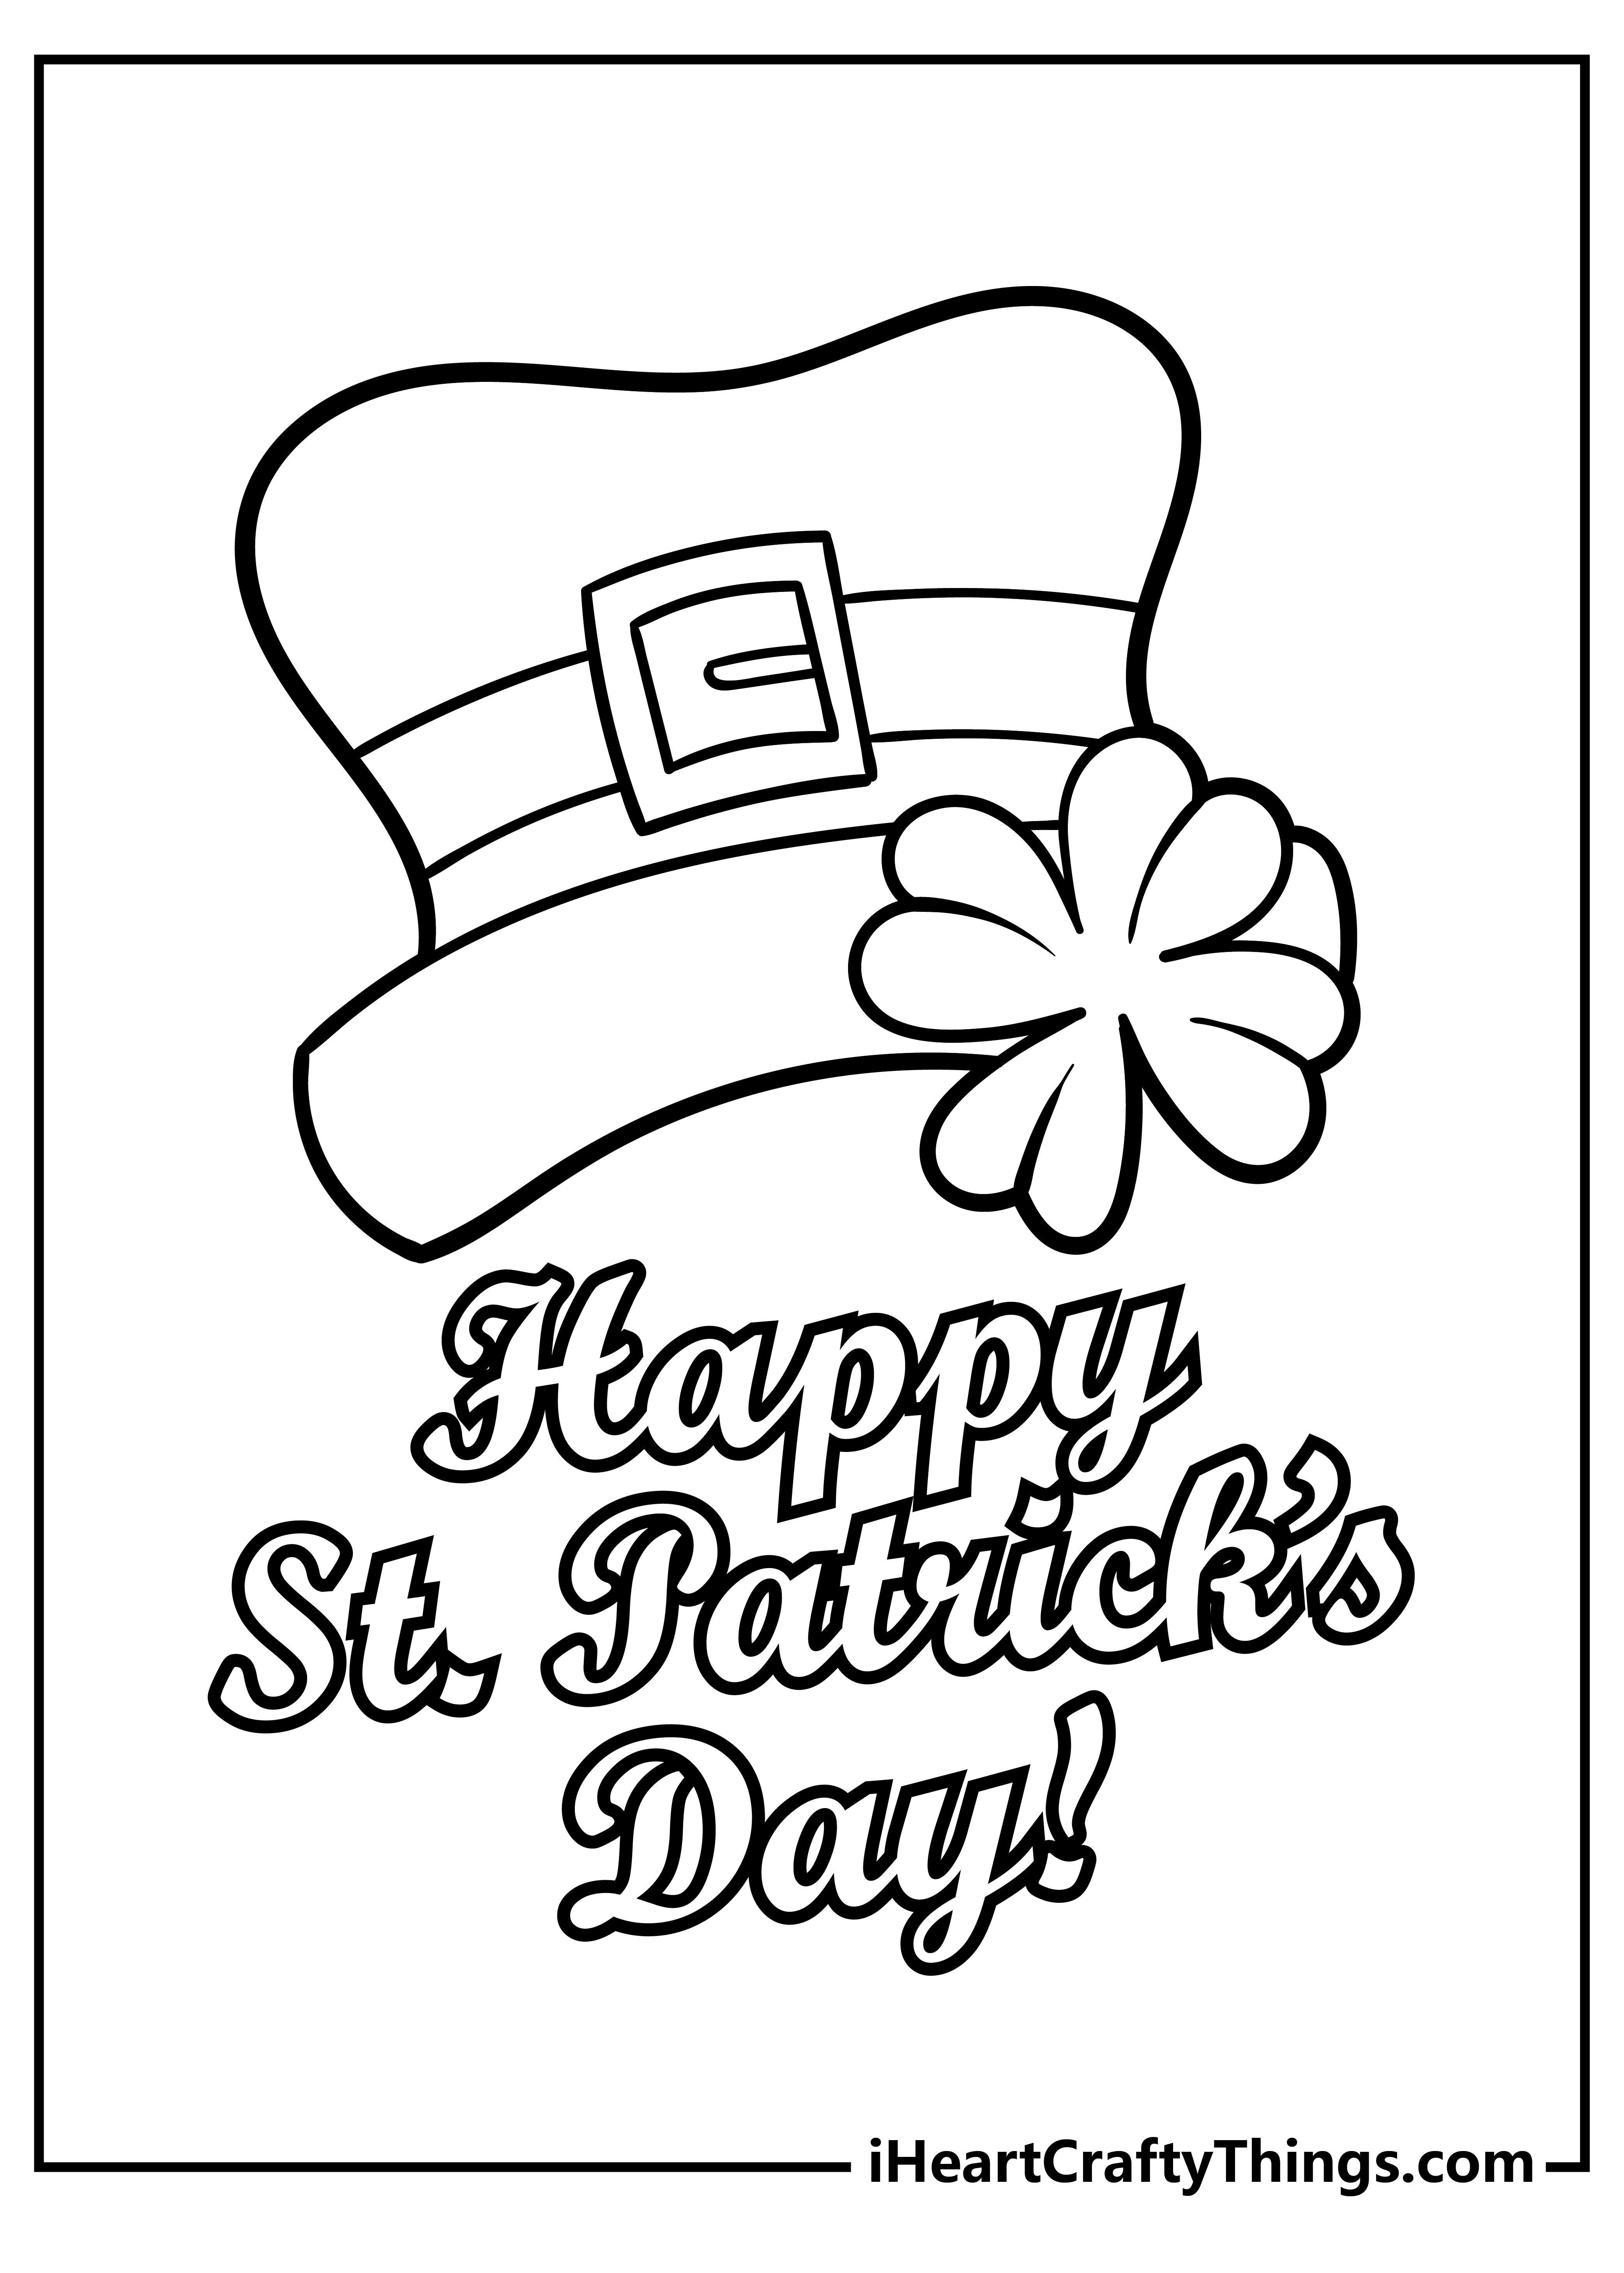 St Patrick’s Day Coloring Pages for adults free printable